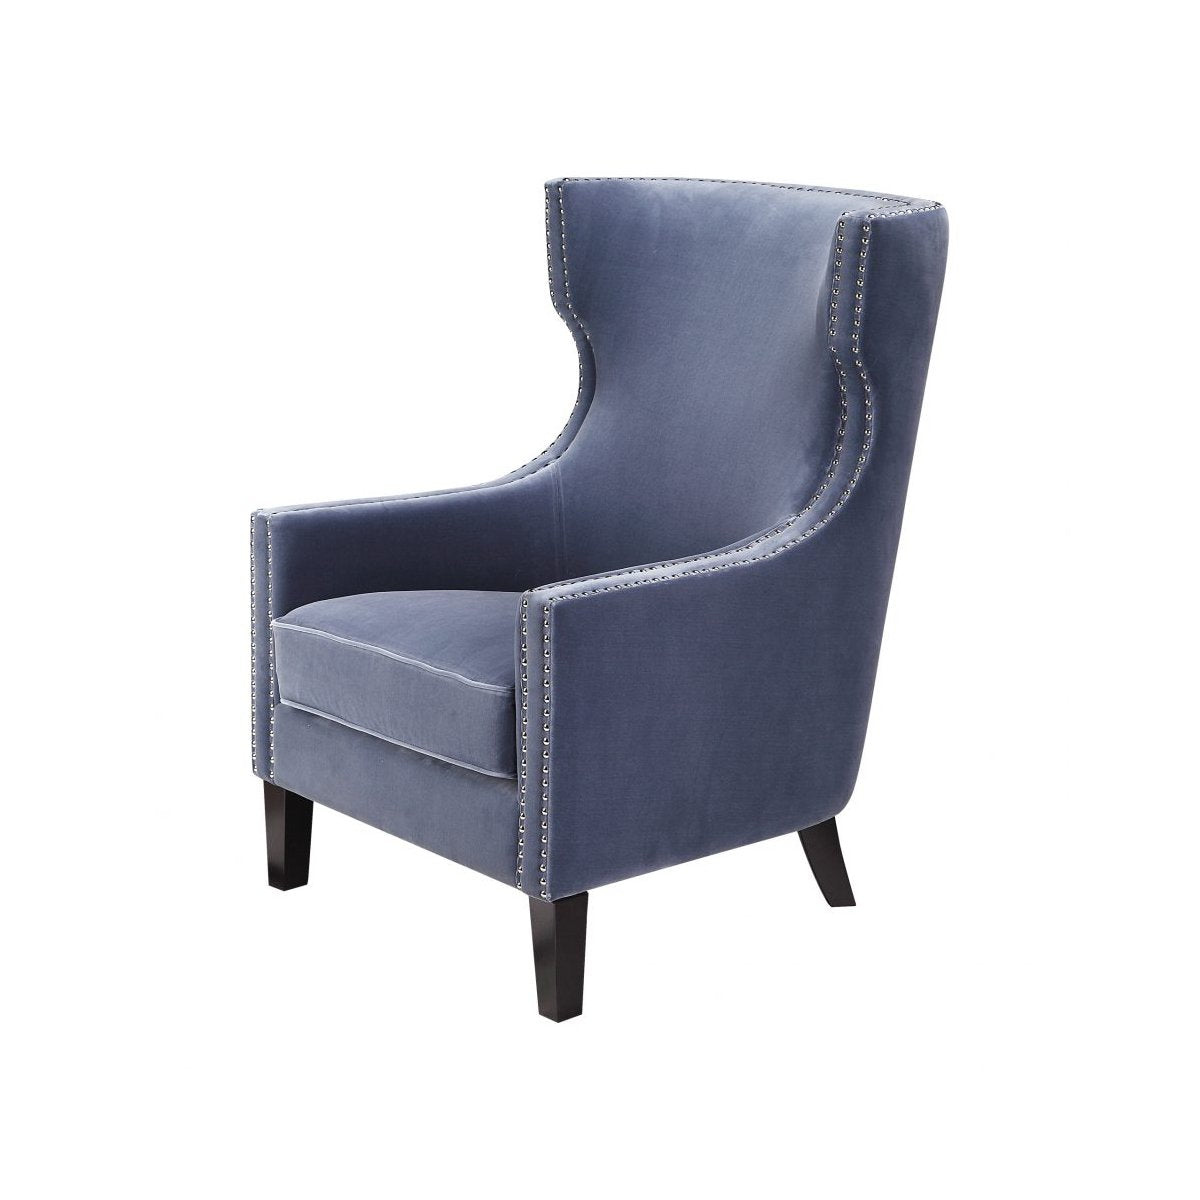 Load image into Gallery viewer, Valley Arm Chair Blue Occasional Chairs Moe&amp;#39;s     Four Hands, Burke Decor, Mid Century Modern Furniture, Old Bones Furniture Company, Old Bones Co, Modern Mid Century, Designer Furniture, https://www.oldbonesco.com/
